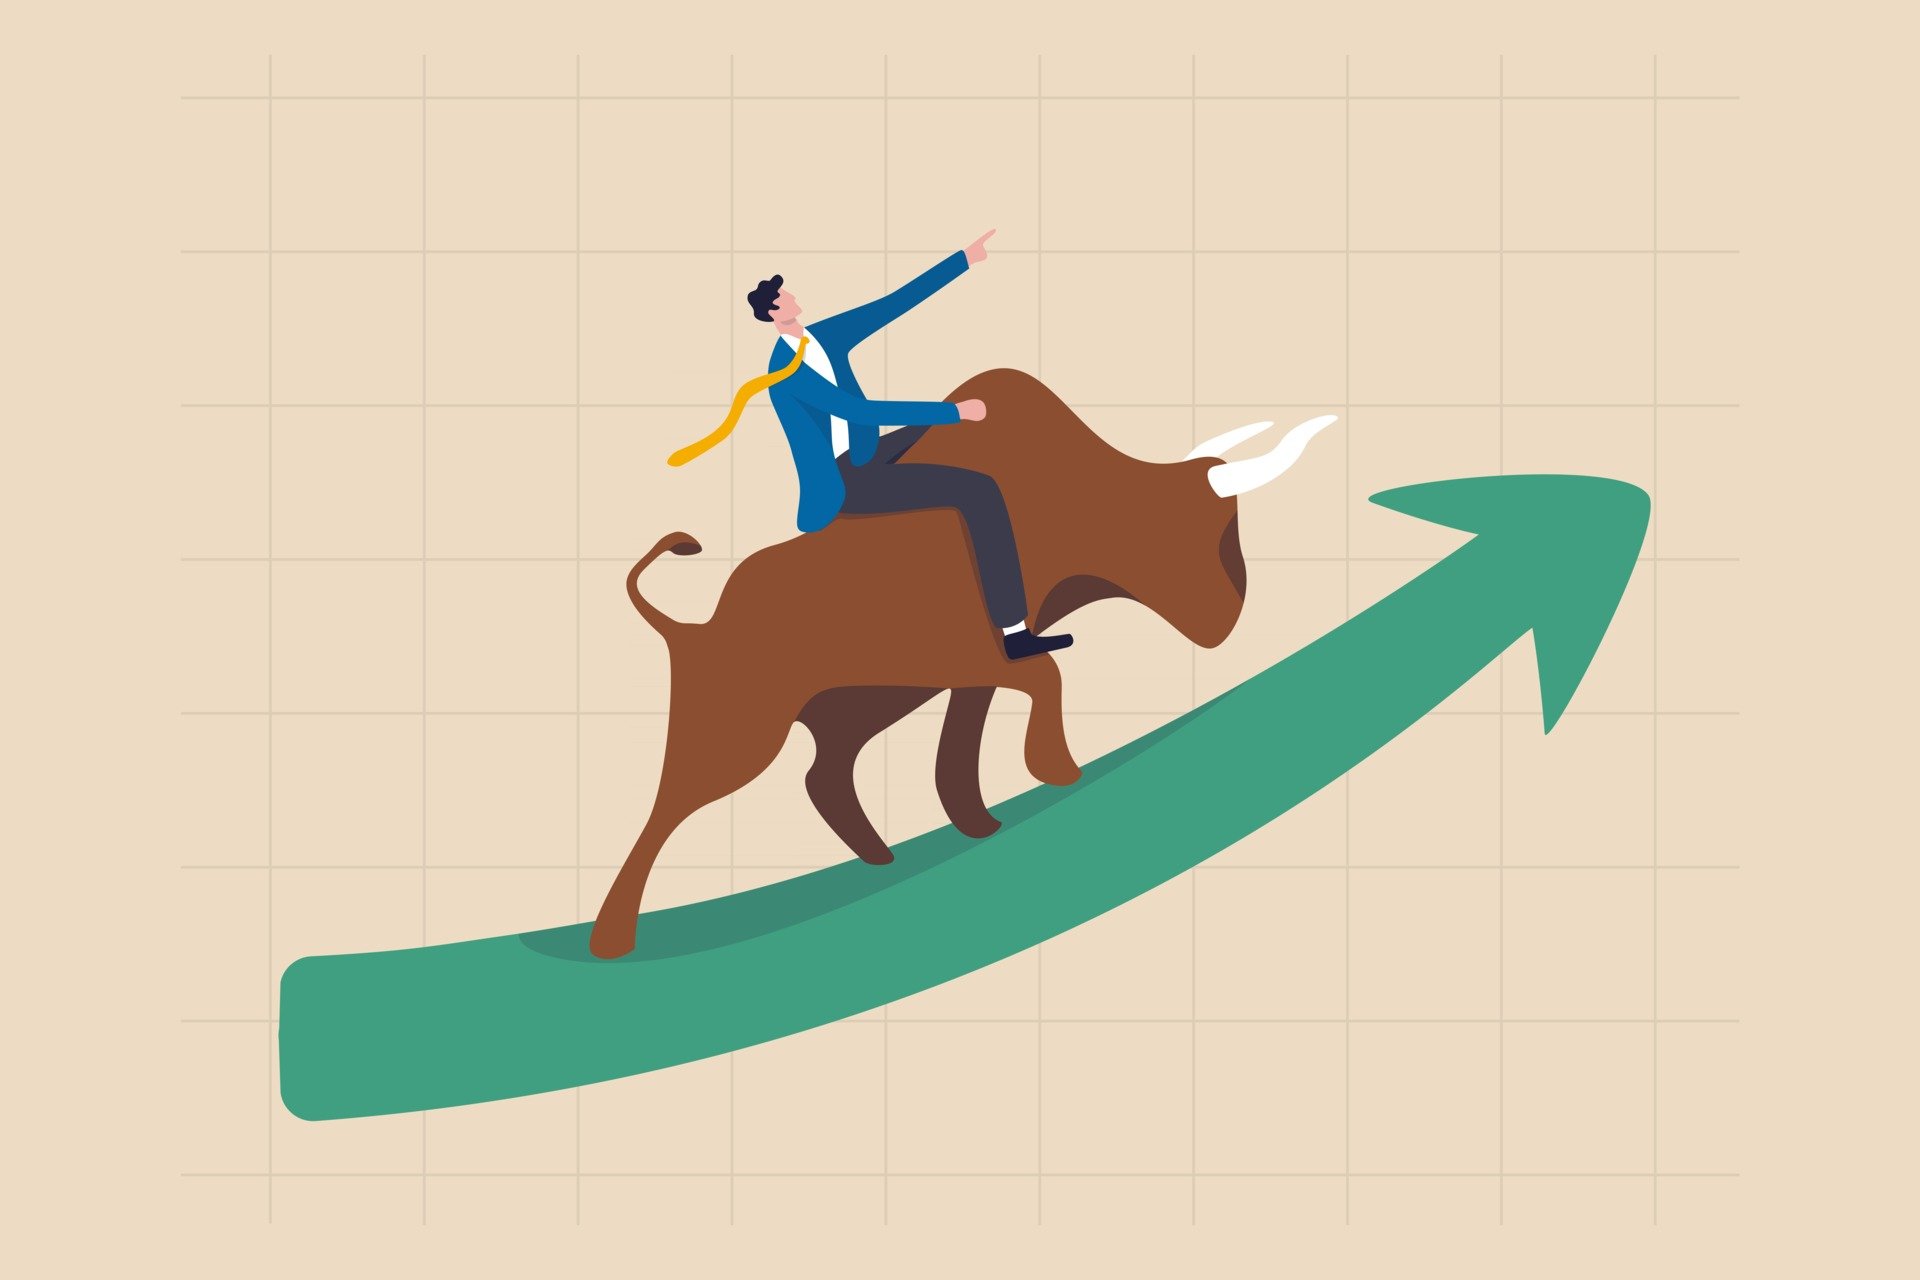 Picture of a person riding a bull up a green arrow, depicting altcoin run-up